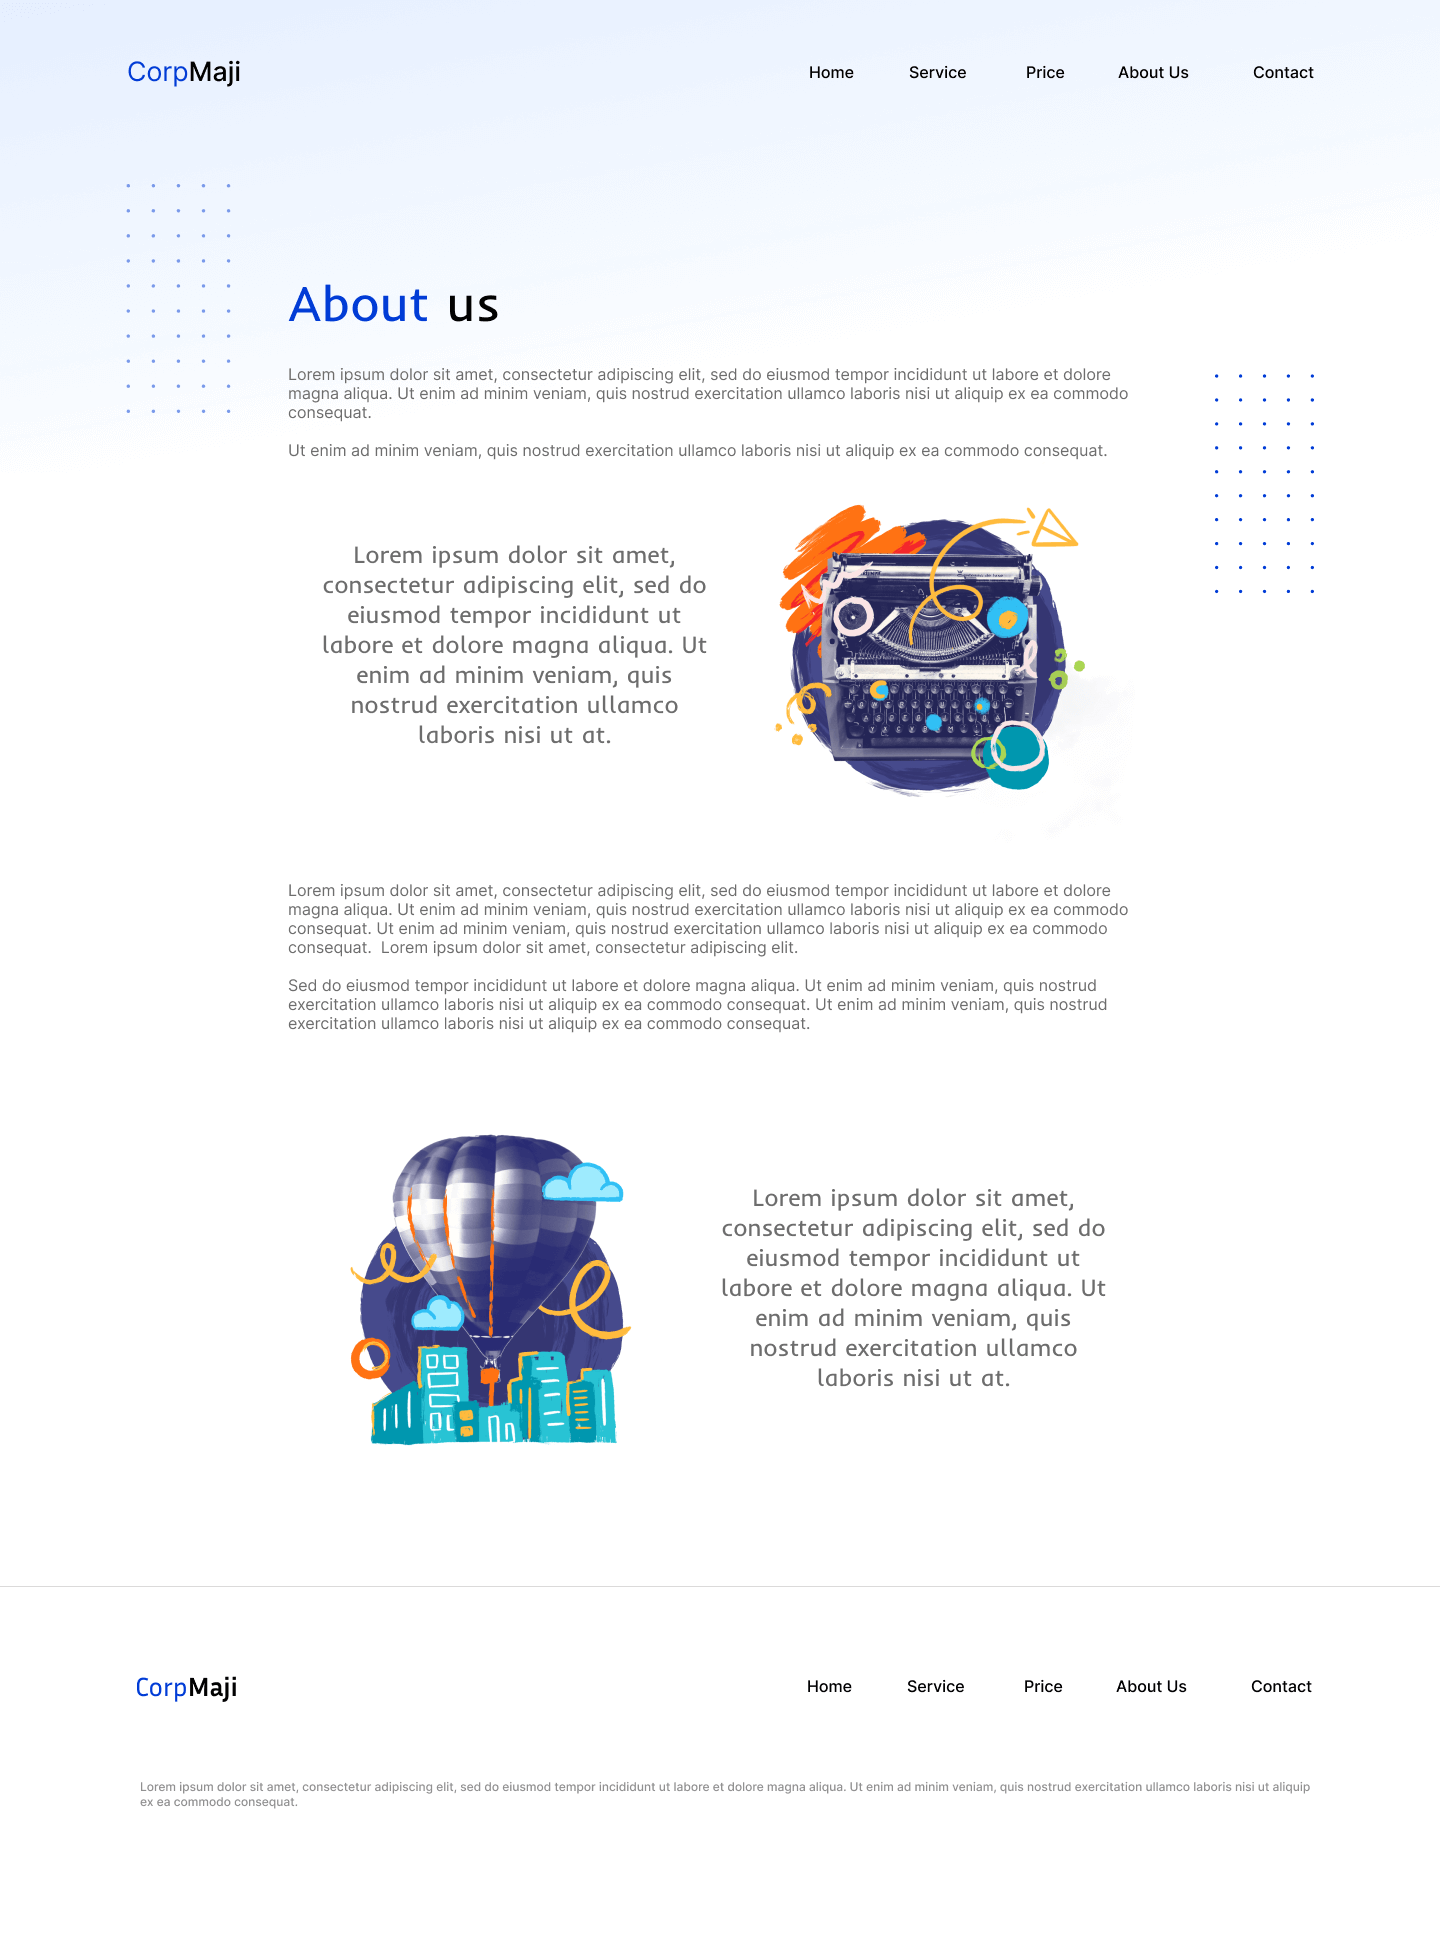 about-us page